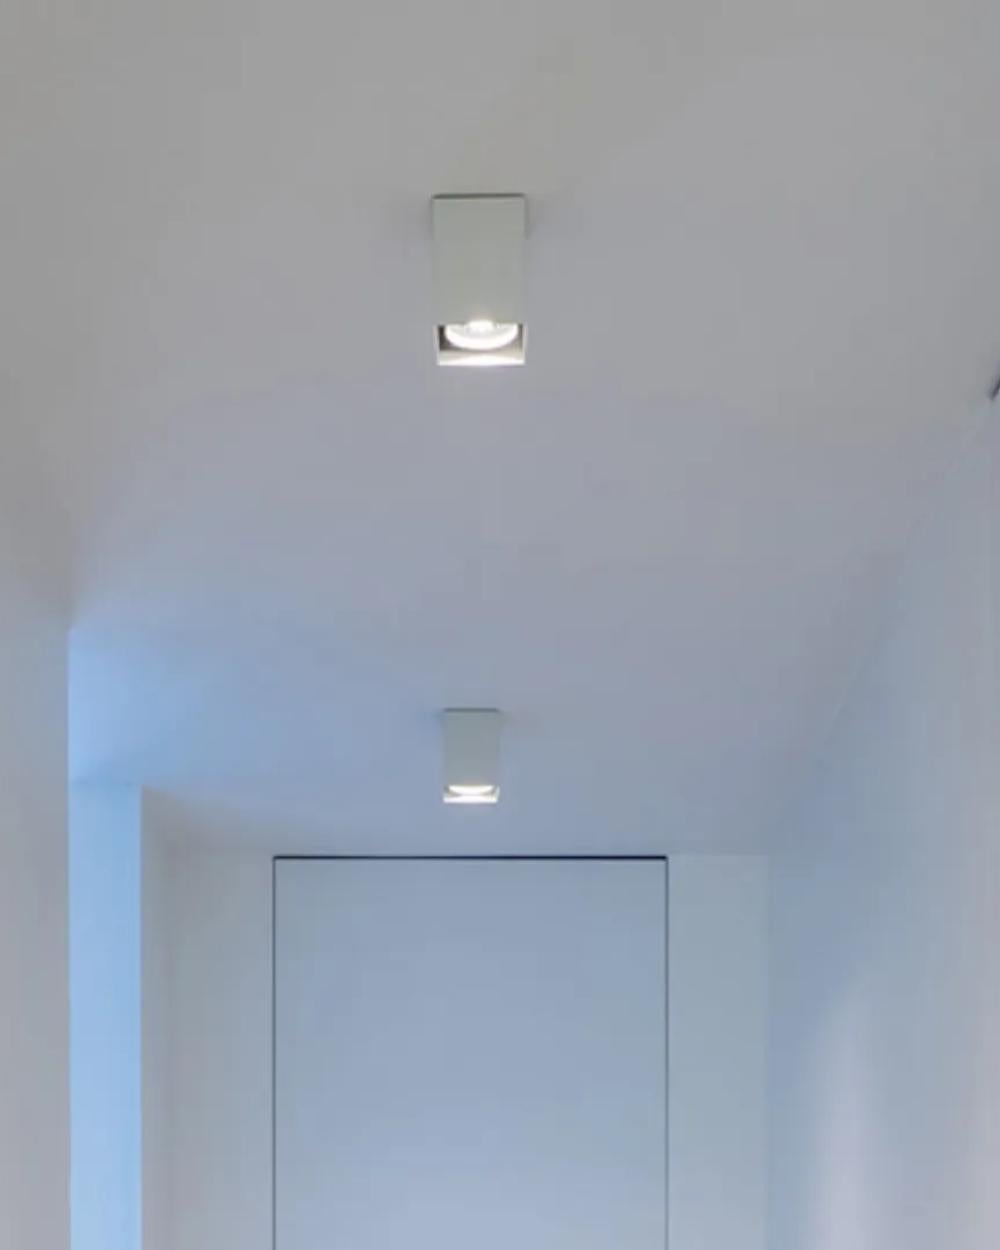 A tool to light.
The luminaire is pure form, a simple container for the light source.
Light is incorporated into the space, becoming an architectural element.

Available in different options: Matt White/Black Bicolor

Finish: Matt White
Max 17W
120V